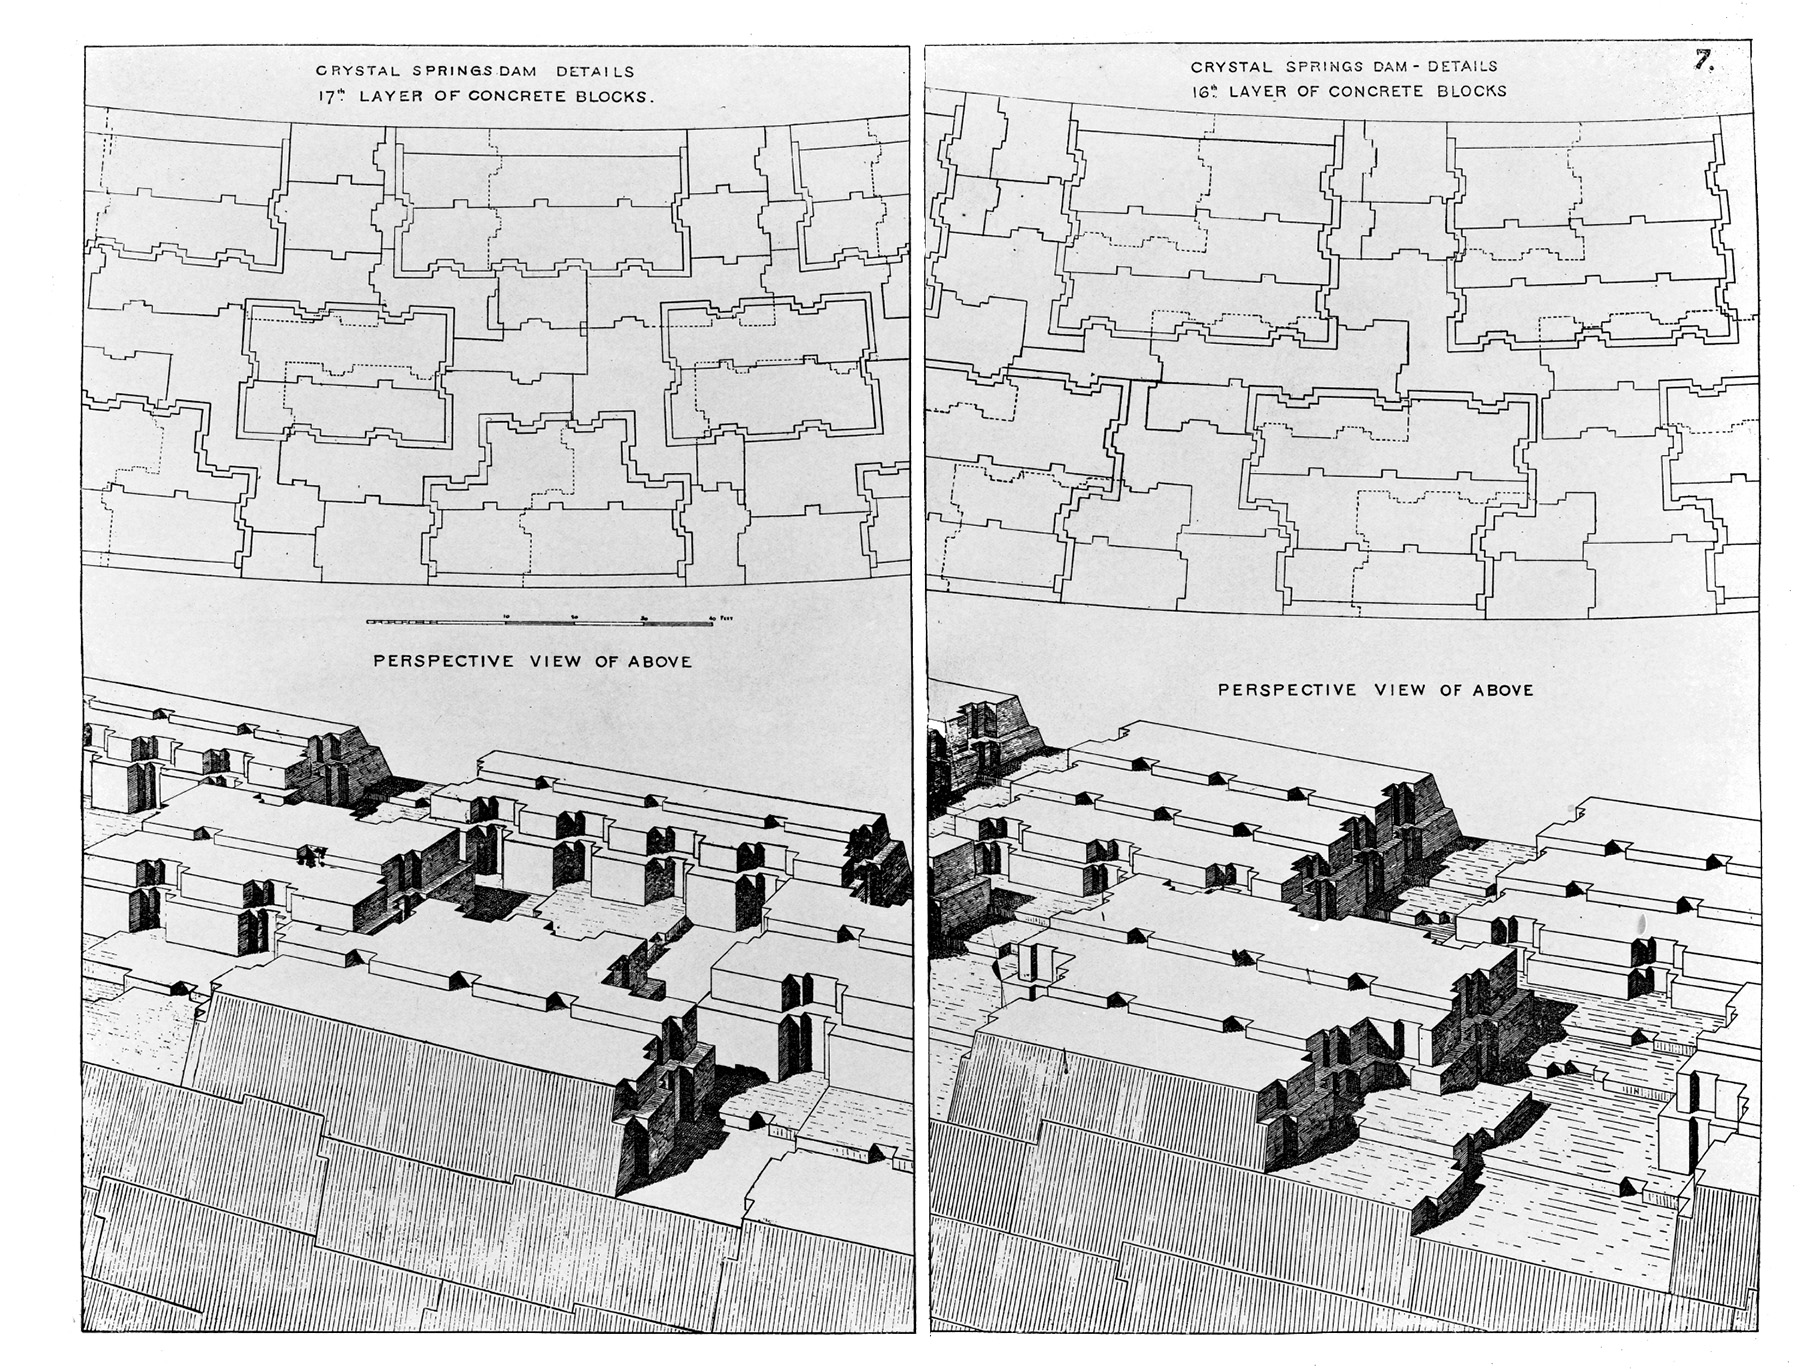 Images show a drawing of the concrete block arrangement for the Crystal Springs Dam in California. 